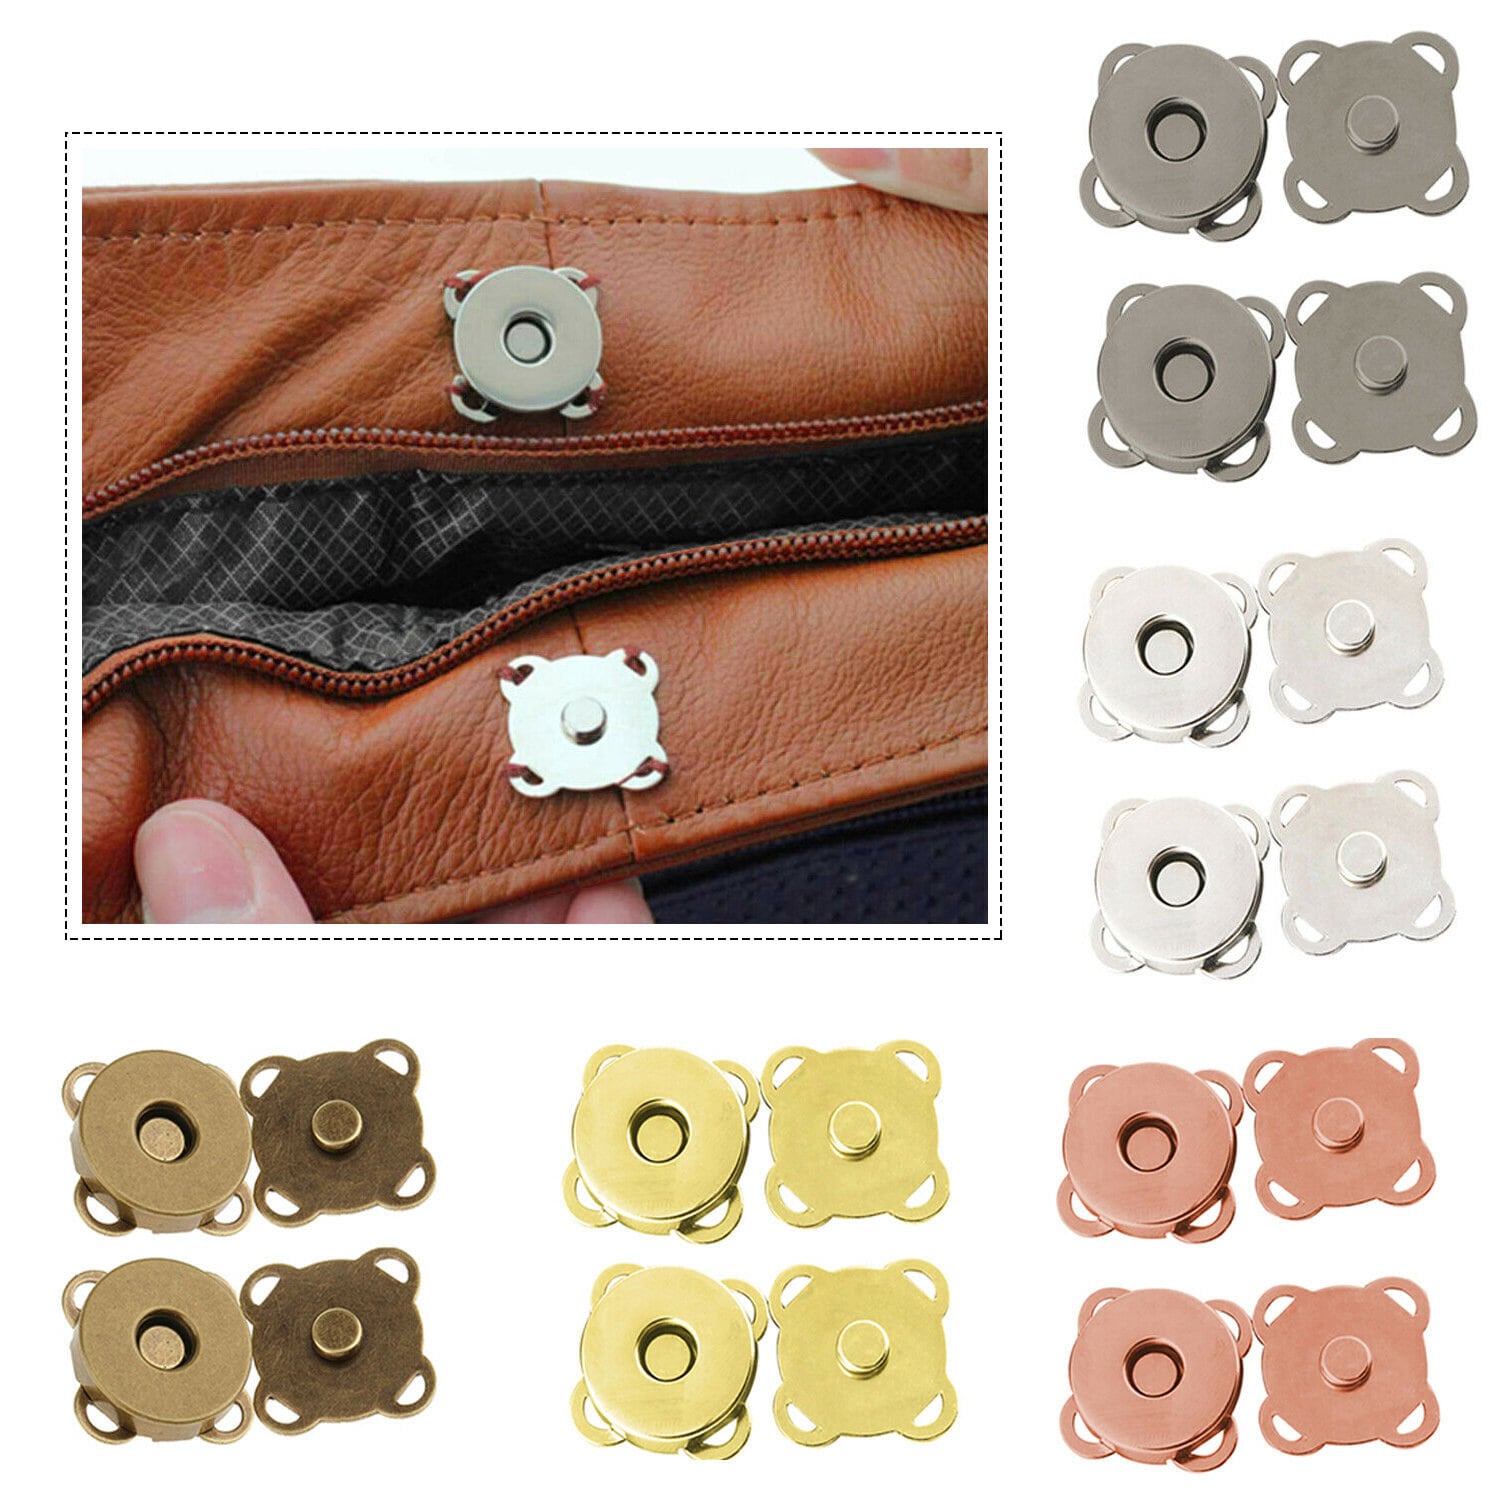 SBest 20 Sets 18mm Coppery Strong Magnetic Button Clasps,Round Magnetic Snaps Bag Button Clasps Closure Purse Handbag with Washer Nickel DIY Craft